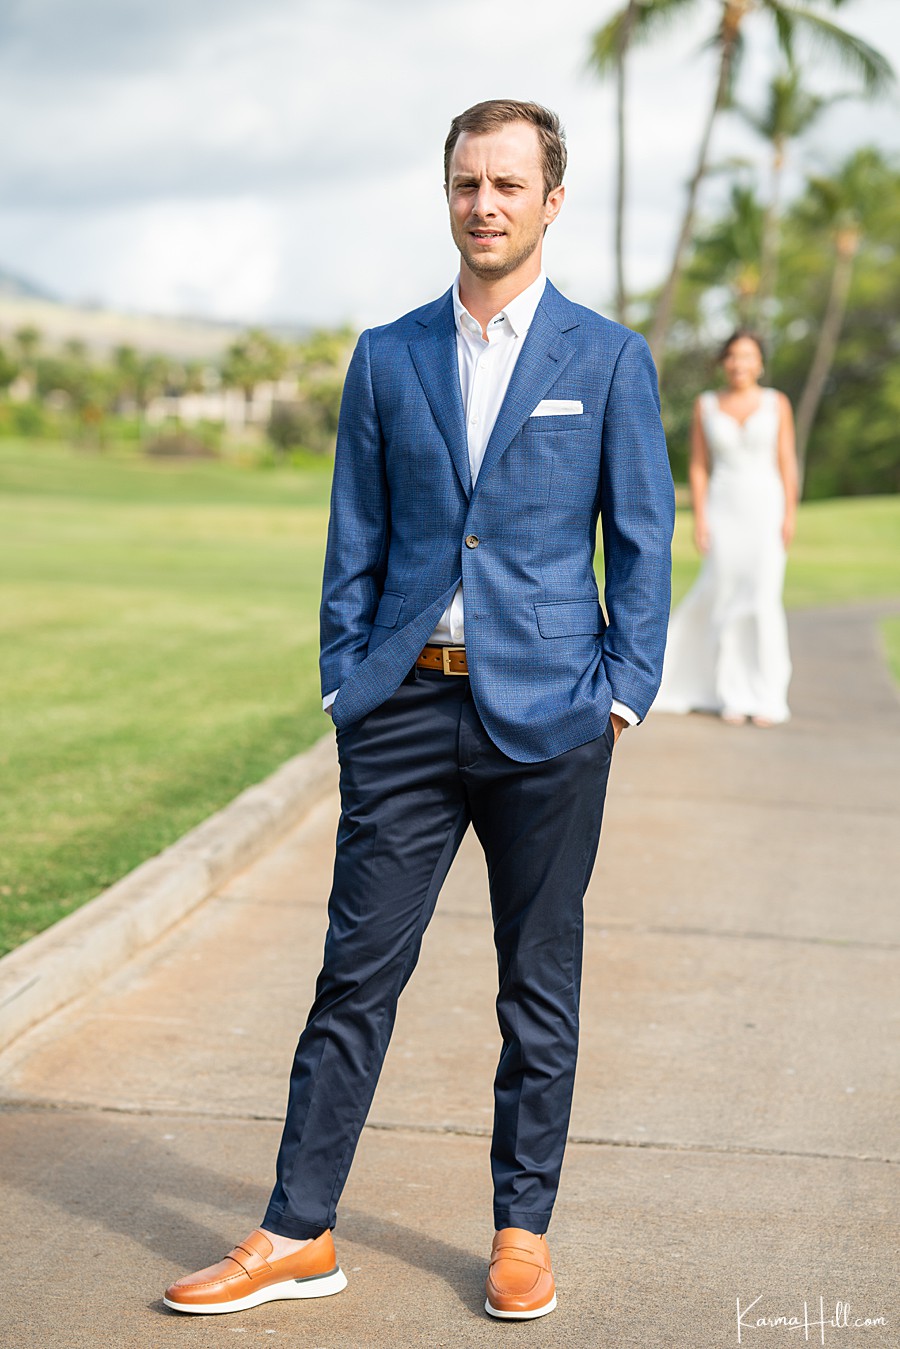 First look photography - maui wedding